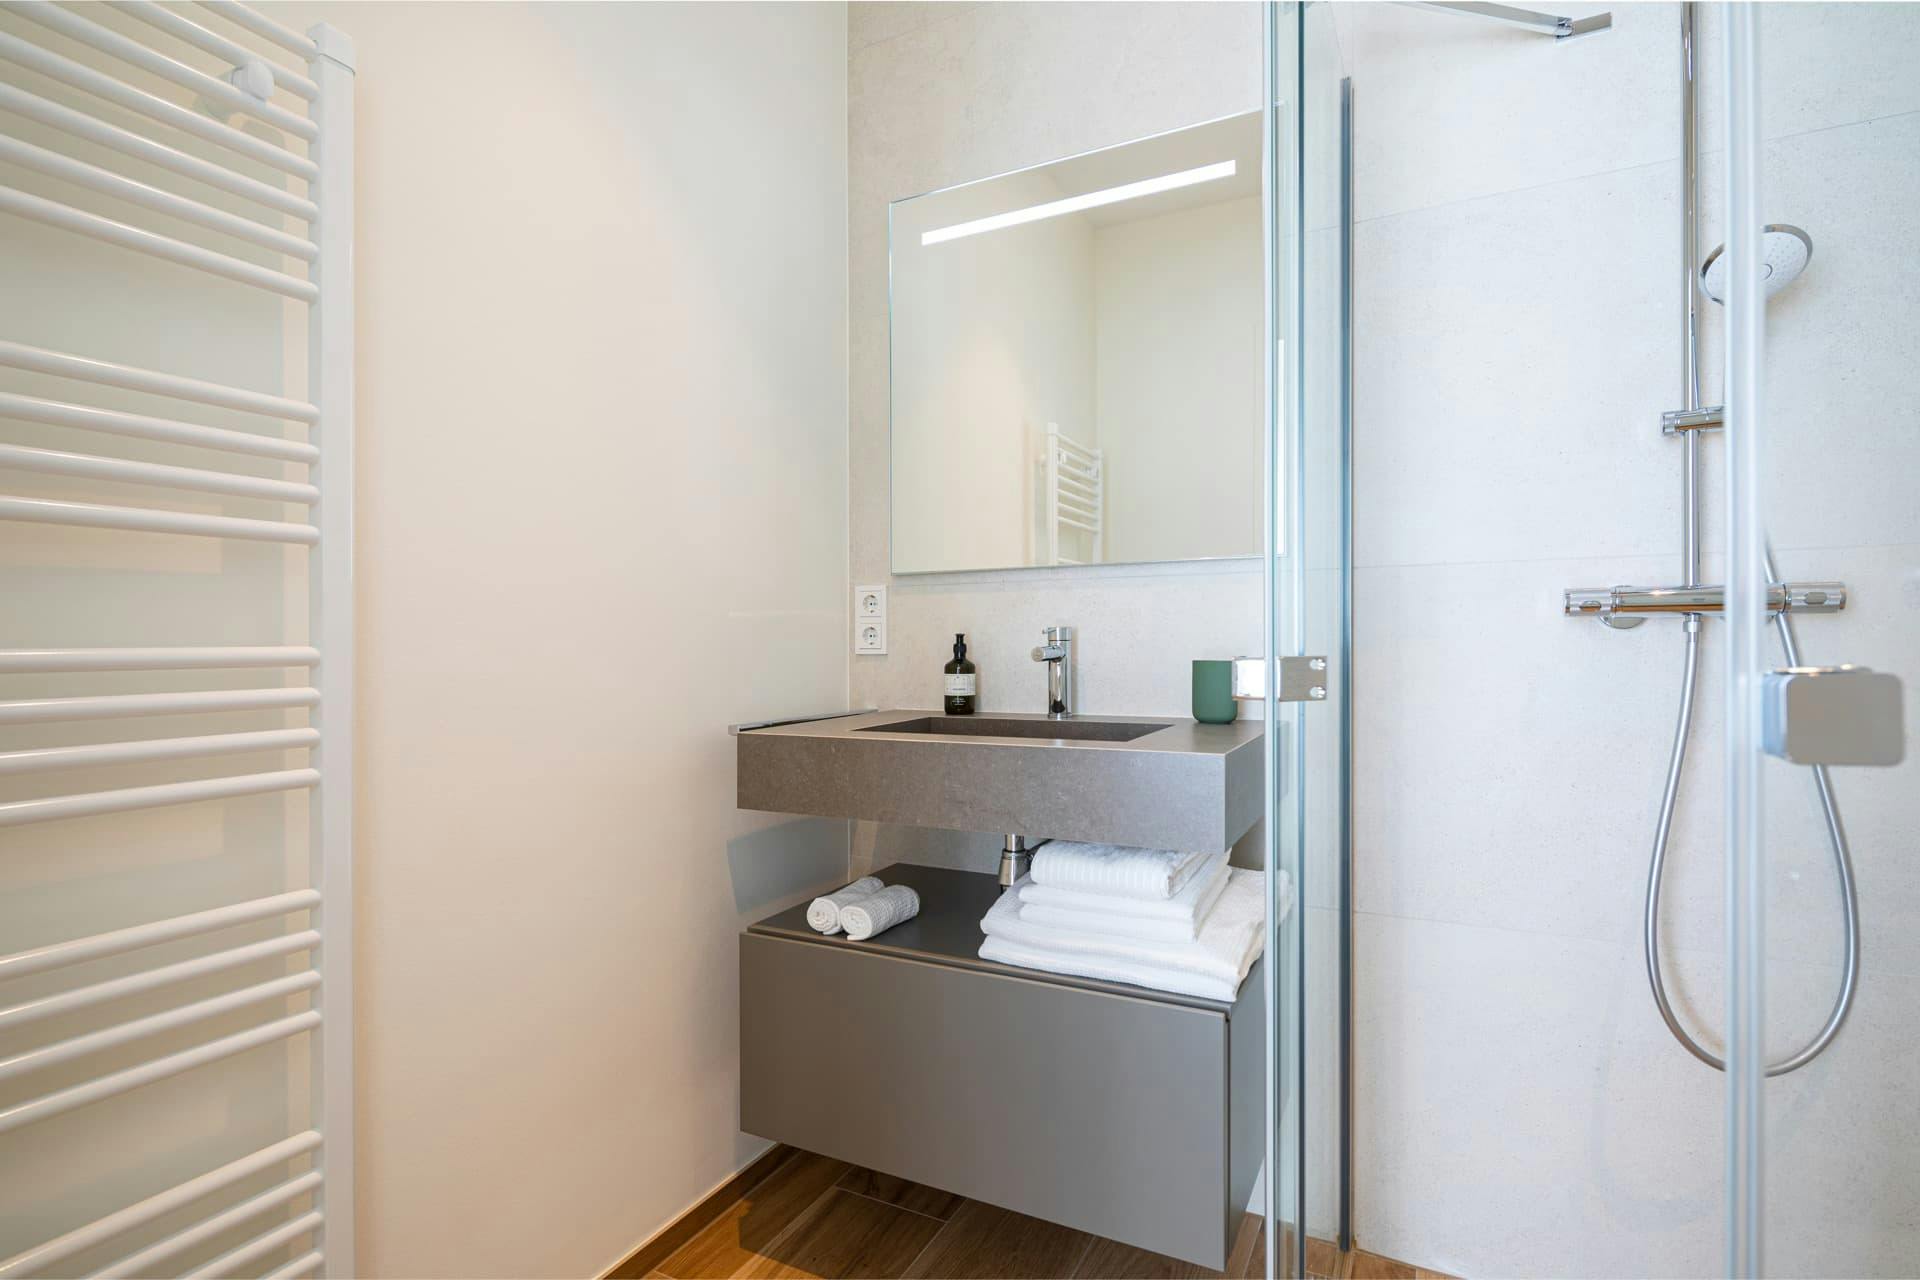 A modern sink with a mirror above and white towels below.  Part of the shower is visible to the right.